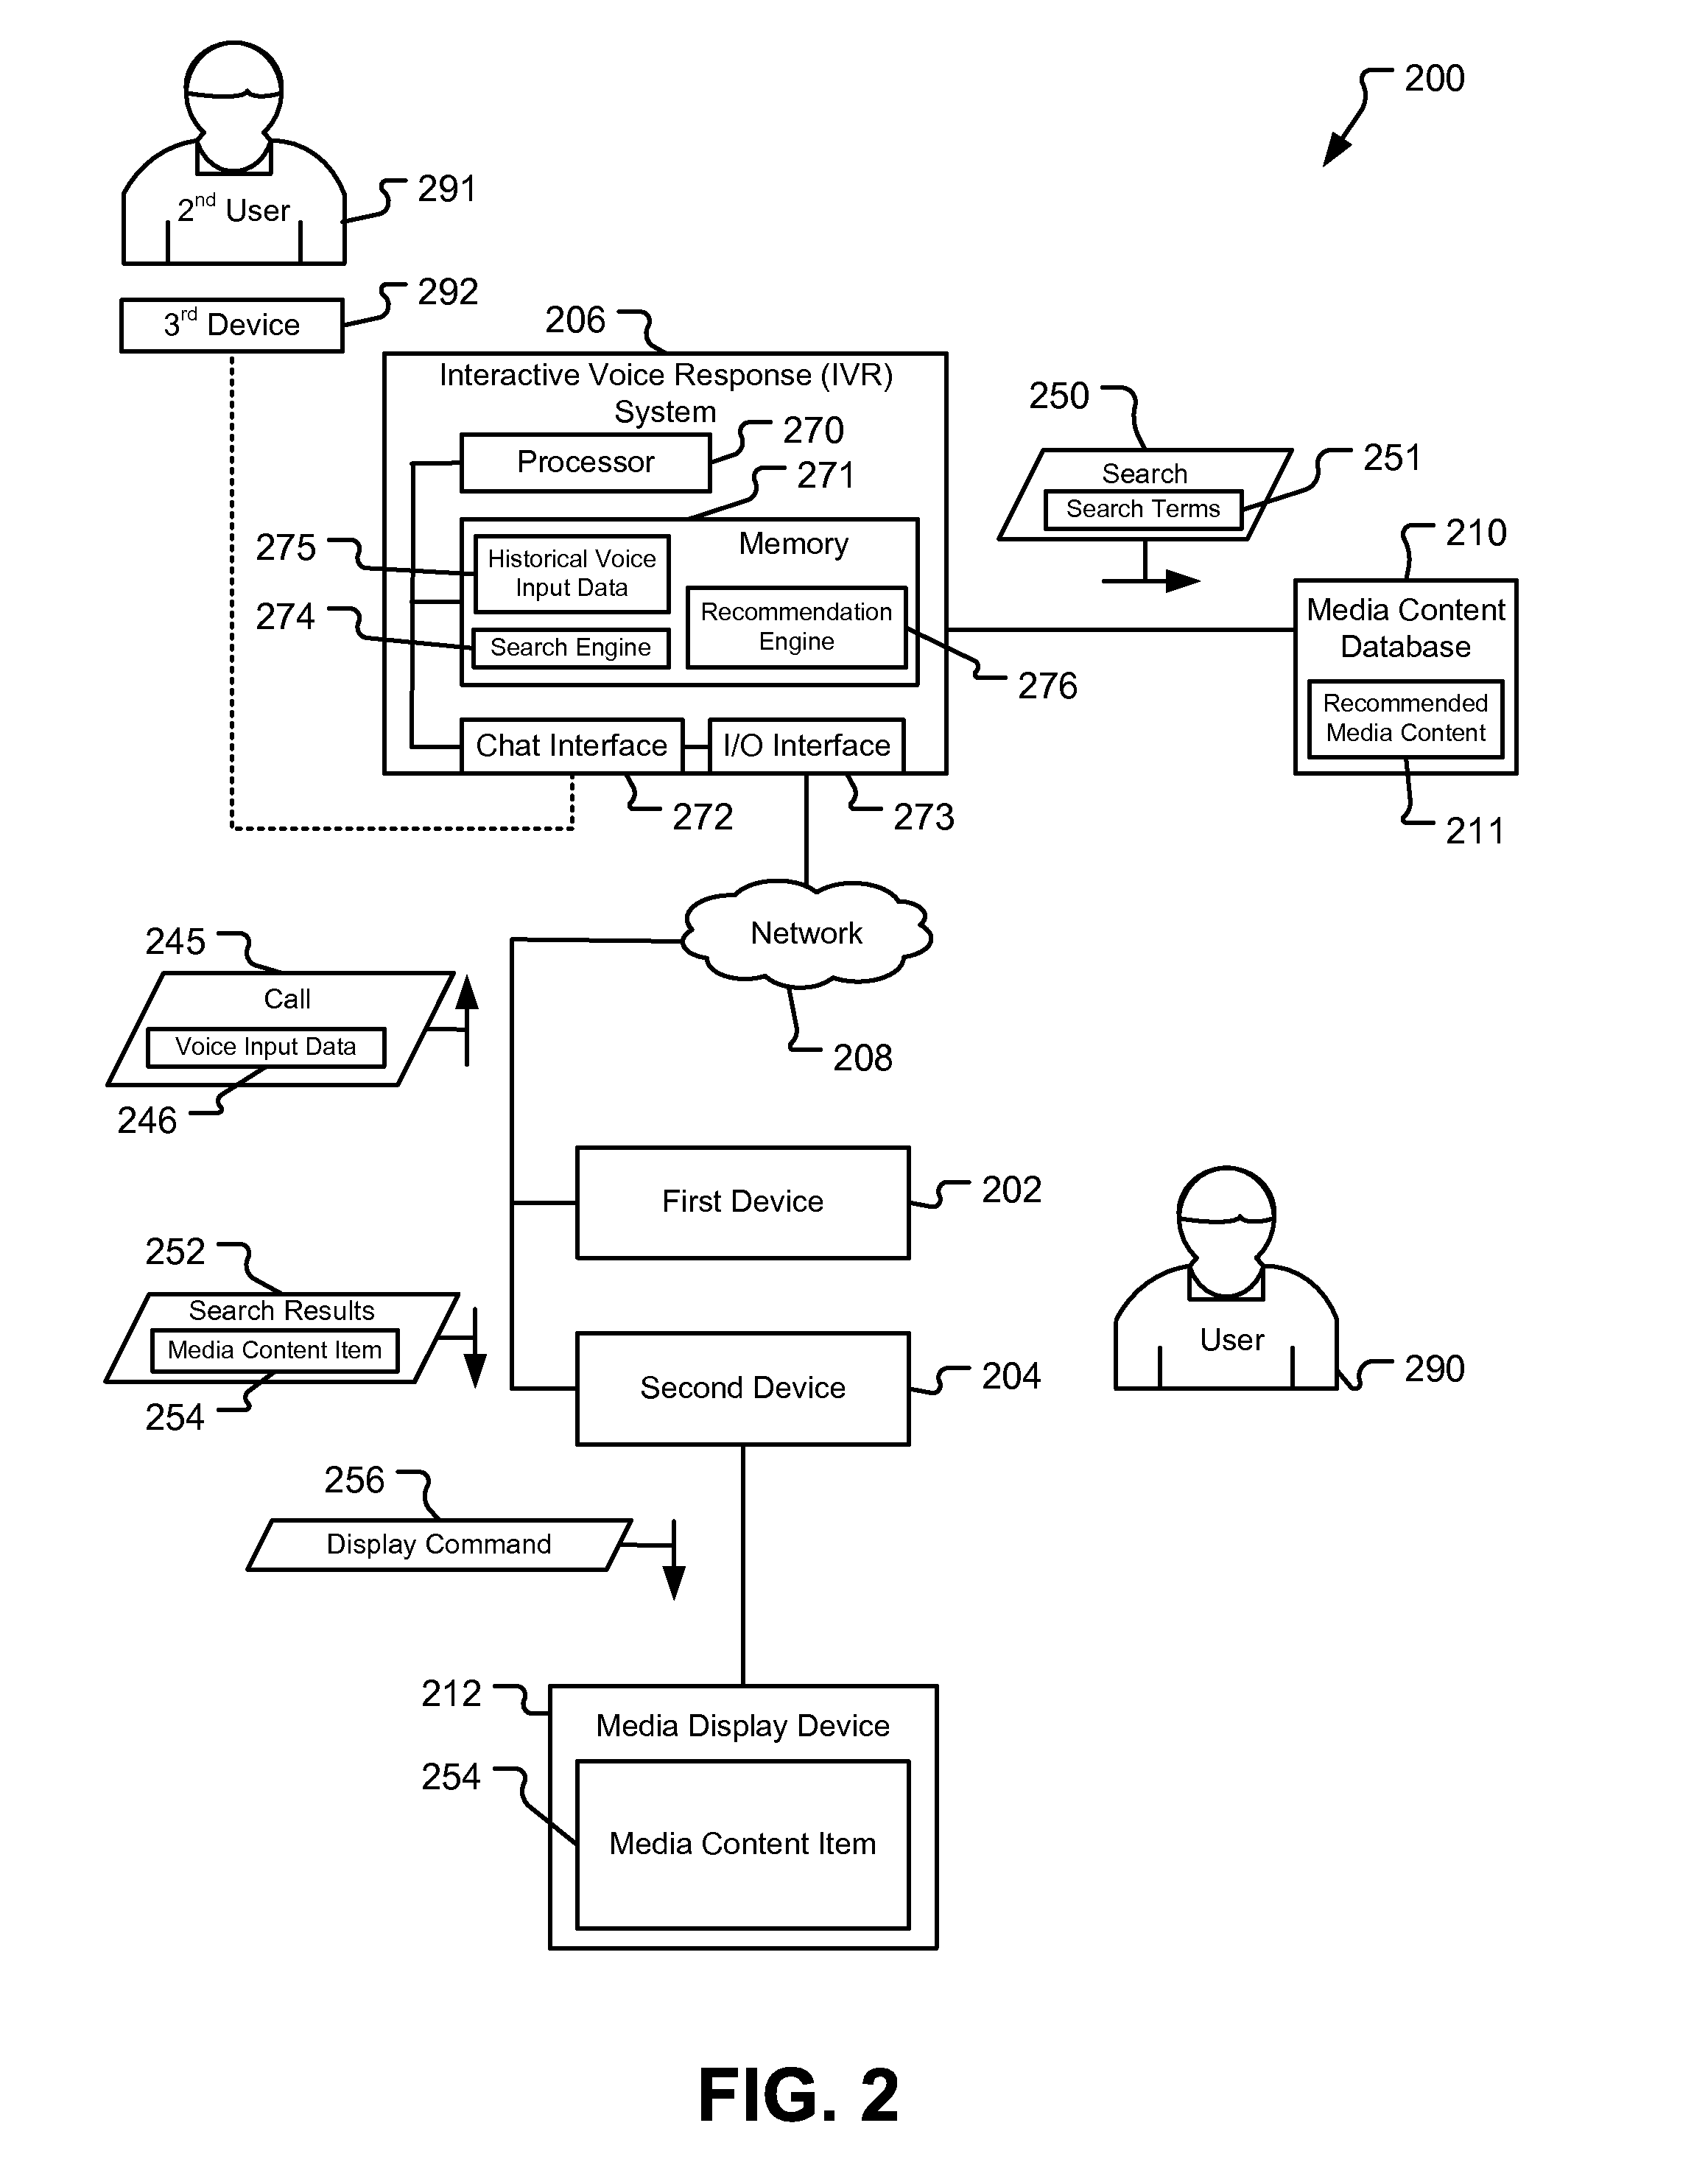 System and Method to Search a Media Content Database Based on Voice Input Data